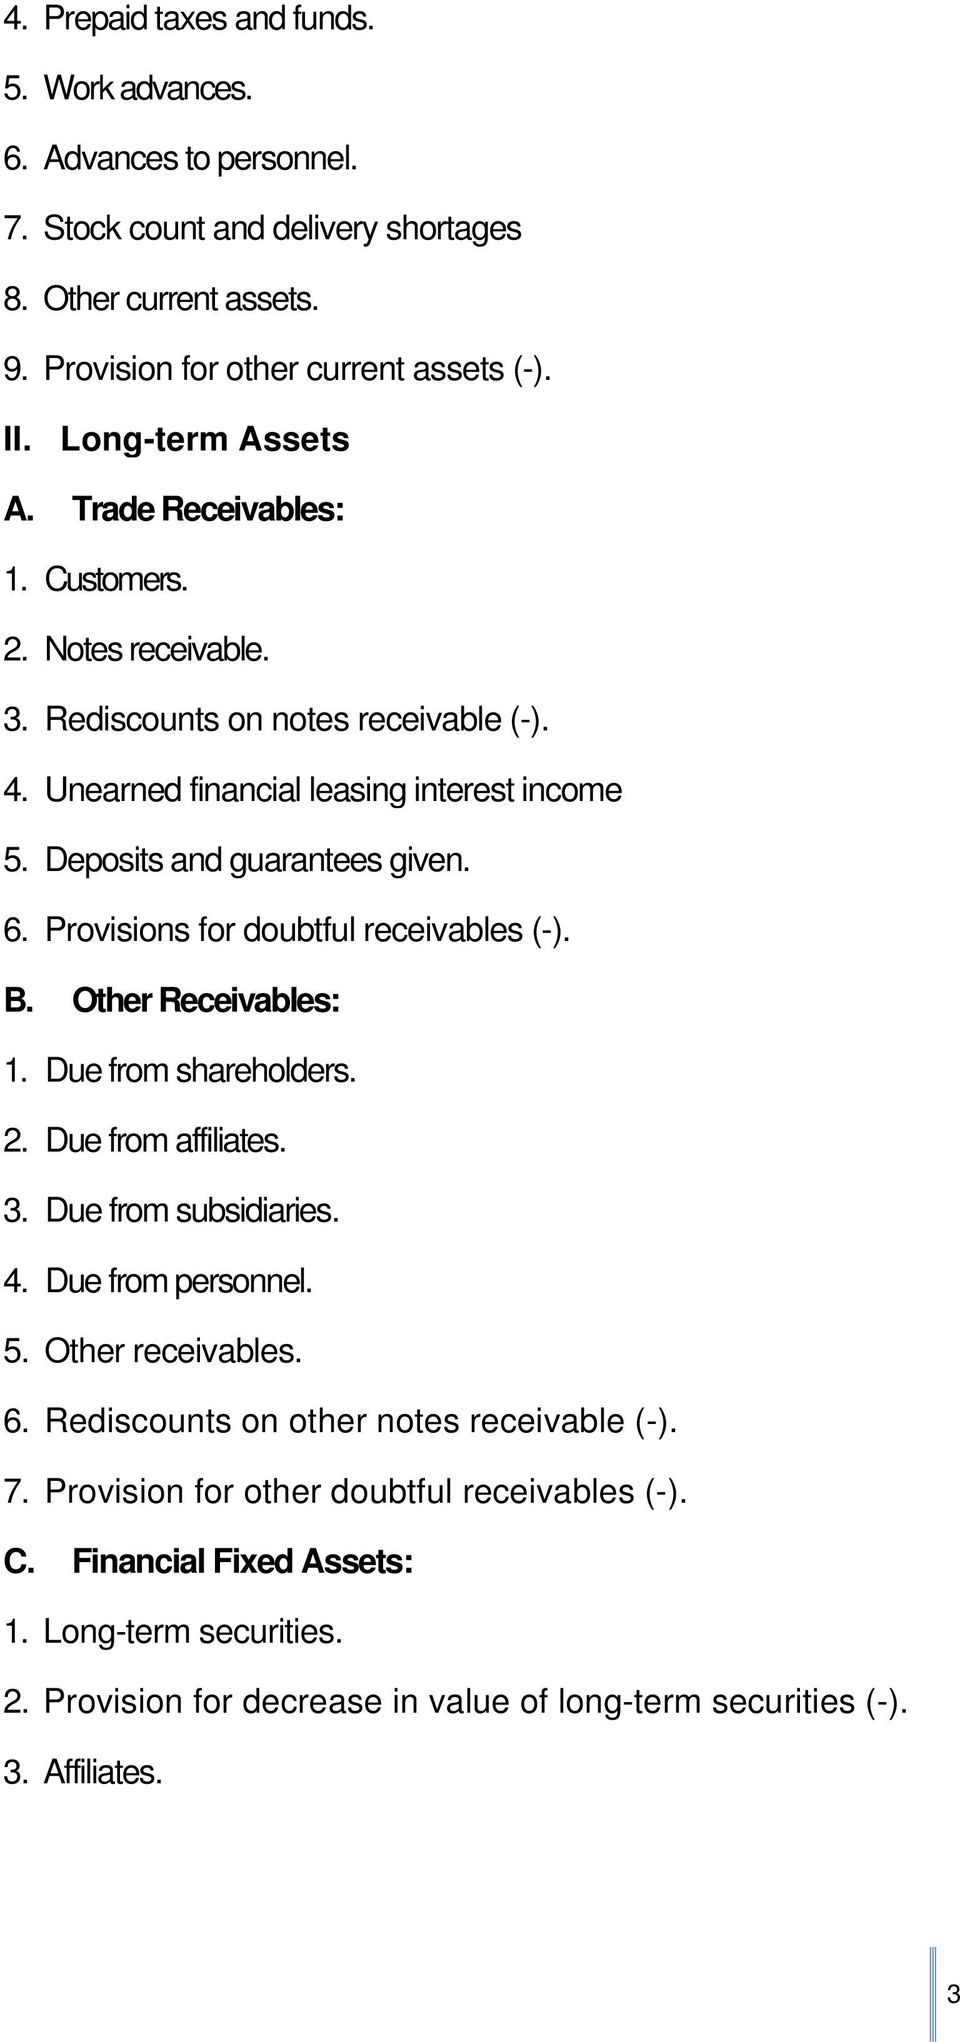 Provisions for doubtful receivables (-). B. Other Receivables: 1. Due from shareholders. 2. Due from affiliates. 3. Due from subsidiaries. 4. Due from personnel. 5. Other receivables. 6.